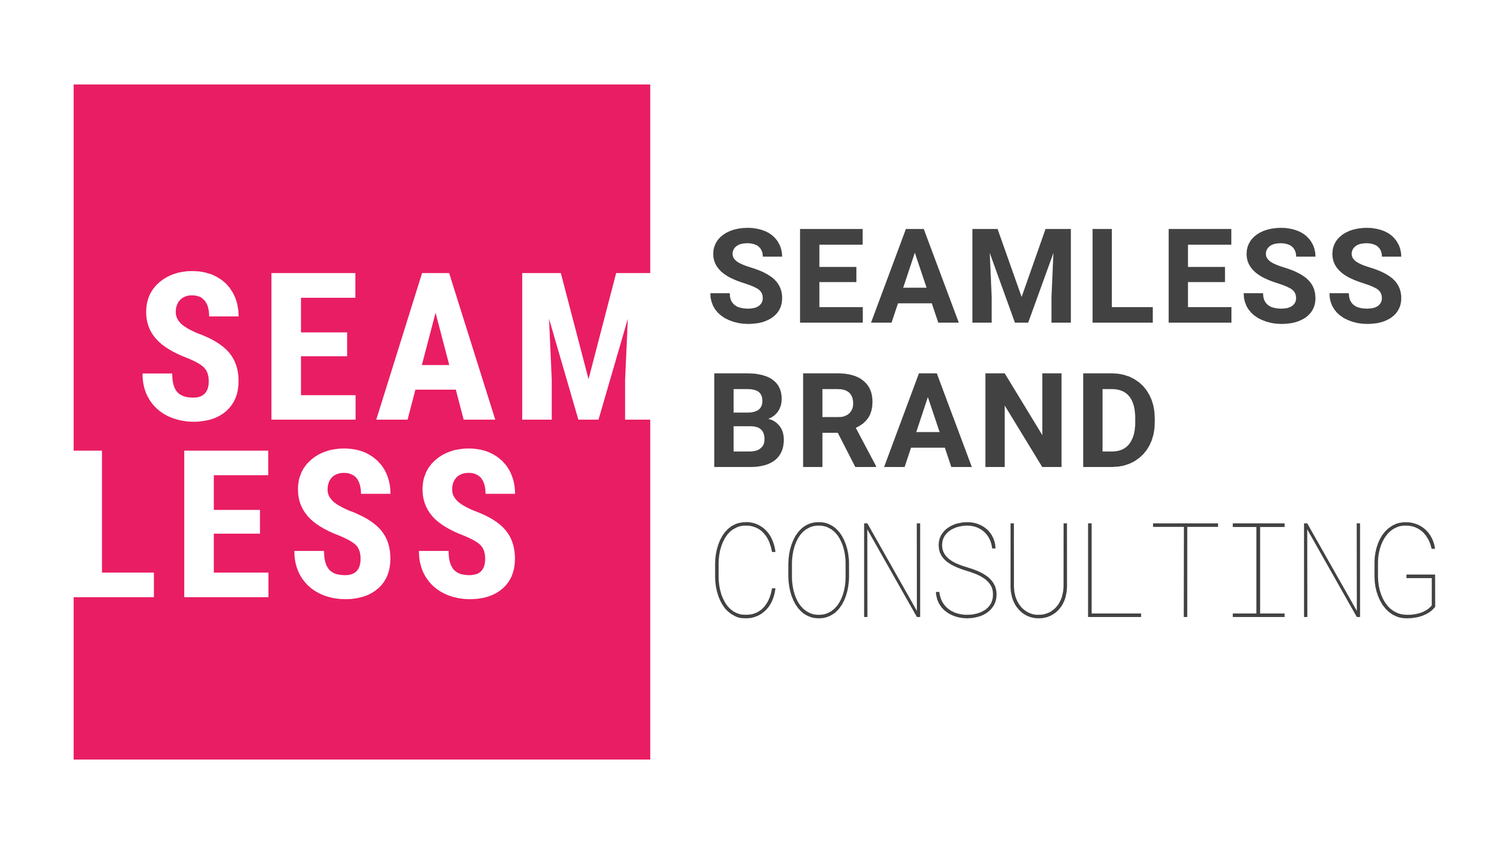 Seamless Brand Consulting